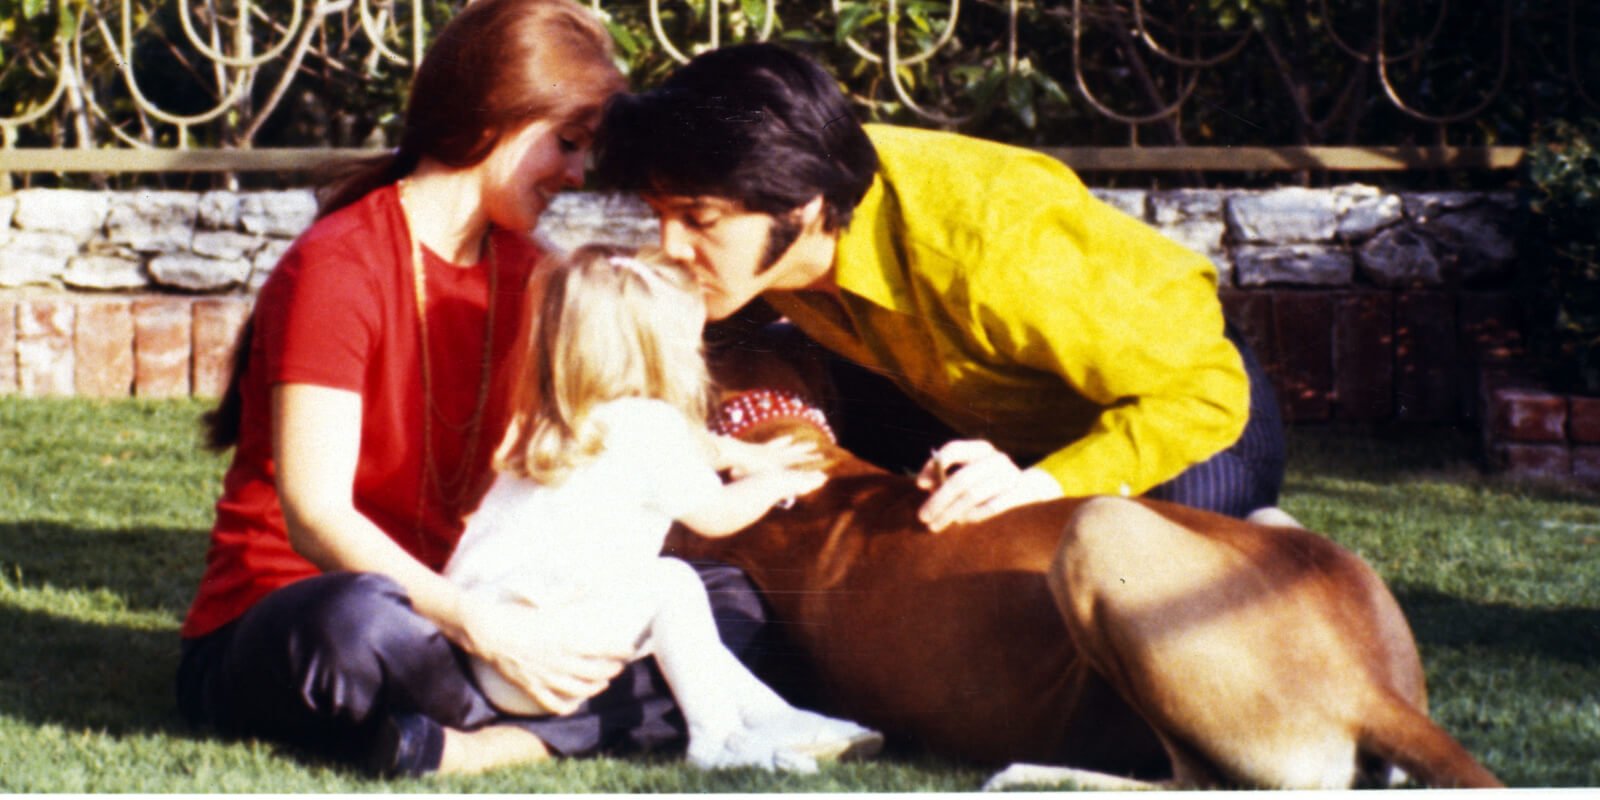 Lisa Marie Presley pictured with Priscilla and Elvis Presley at Graceland in Memphis, TN.